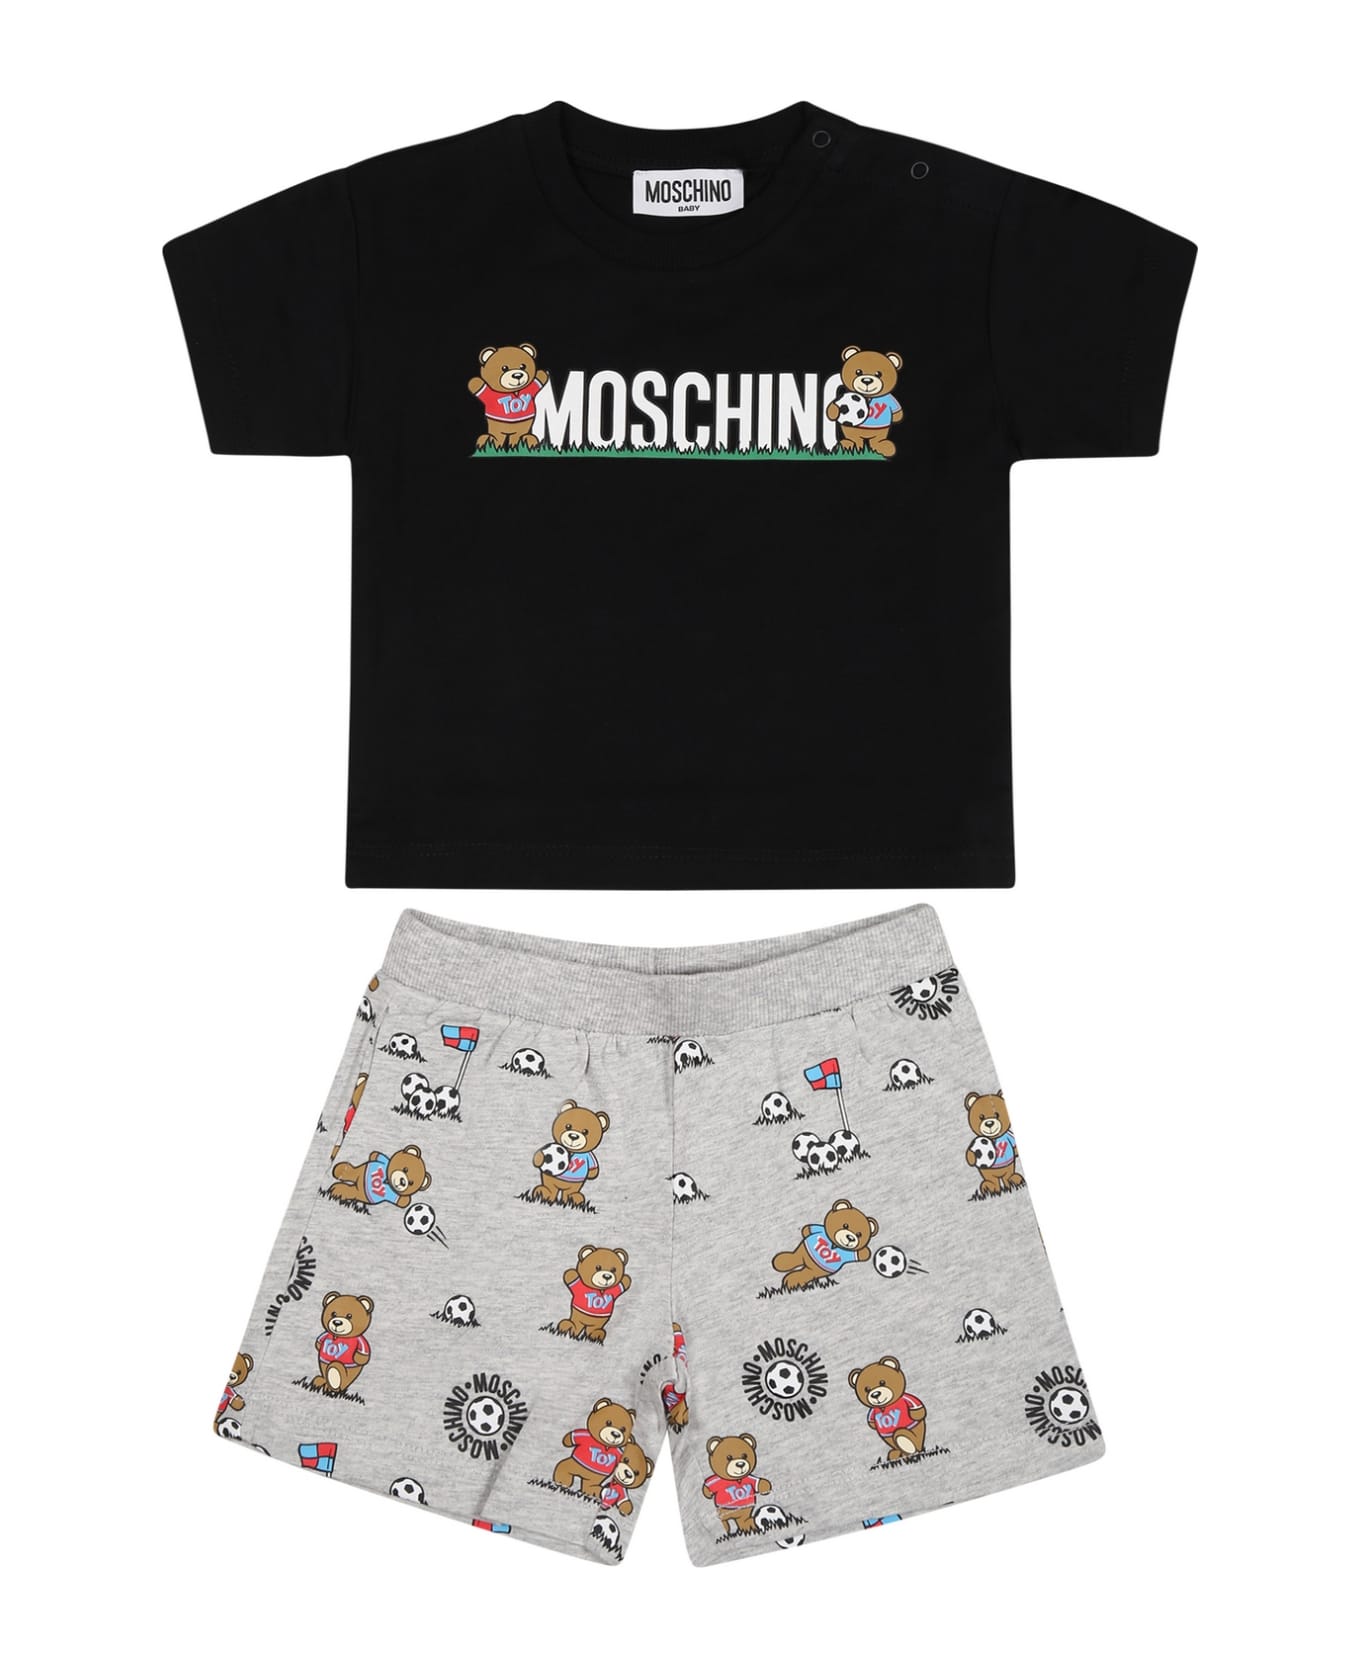 Moschino Black Suit For Baby Boy With Teddy Bear And Logo - Black